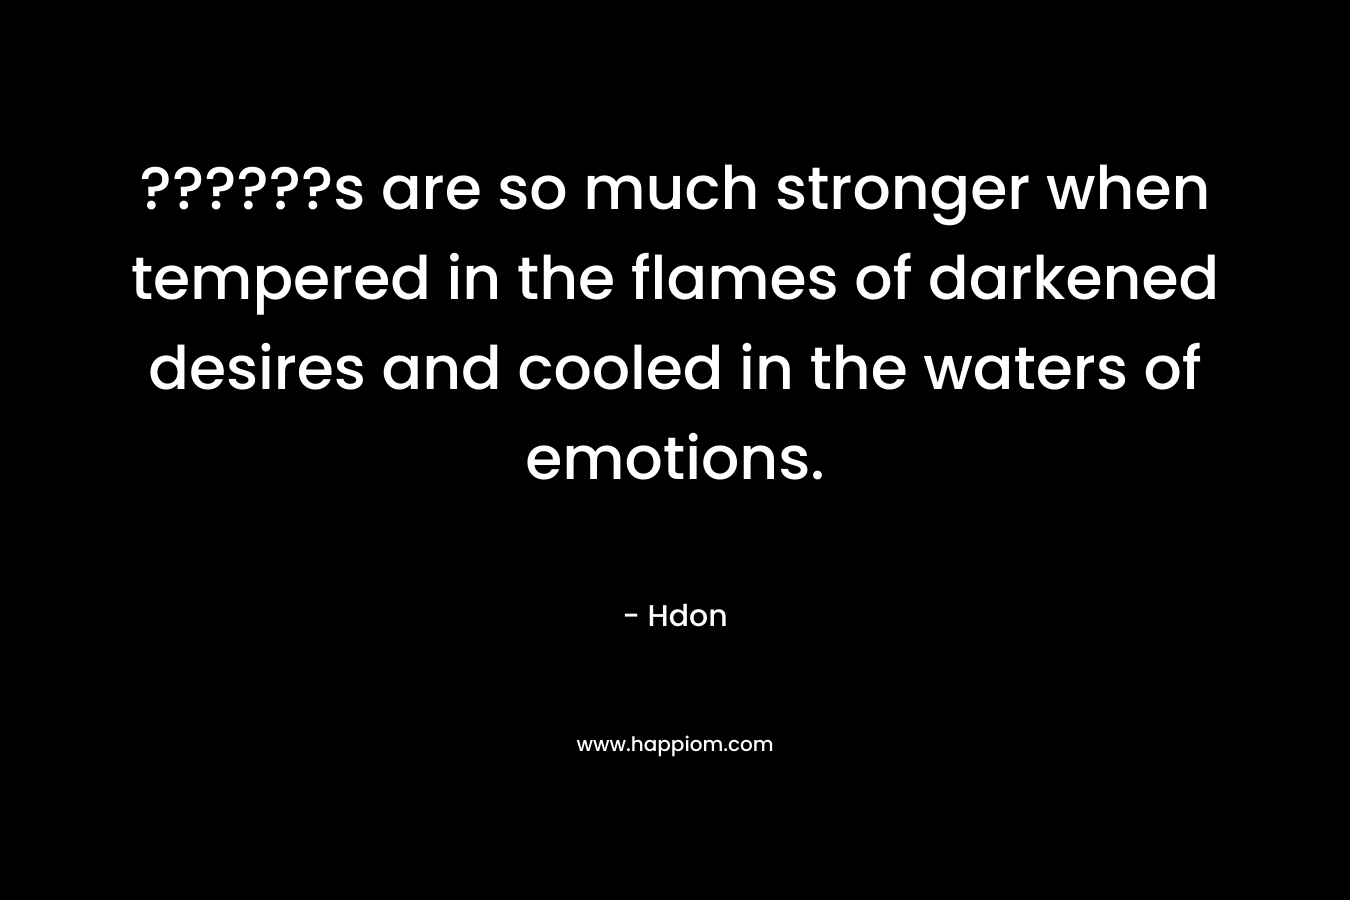 ??????s are so much stronger when tempered in the flames of darkened desires and cooled in the waters of emotions. – Hdon